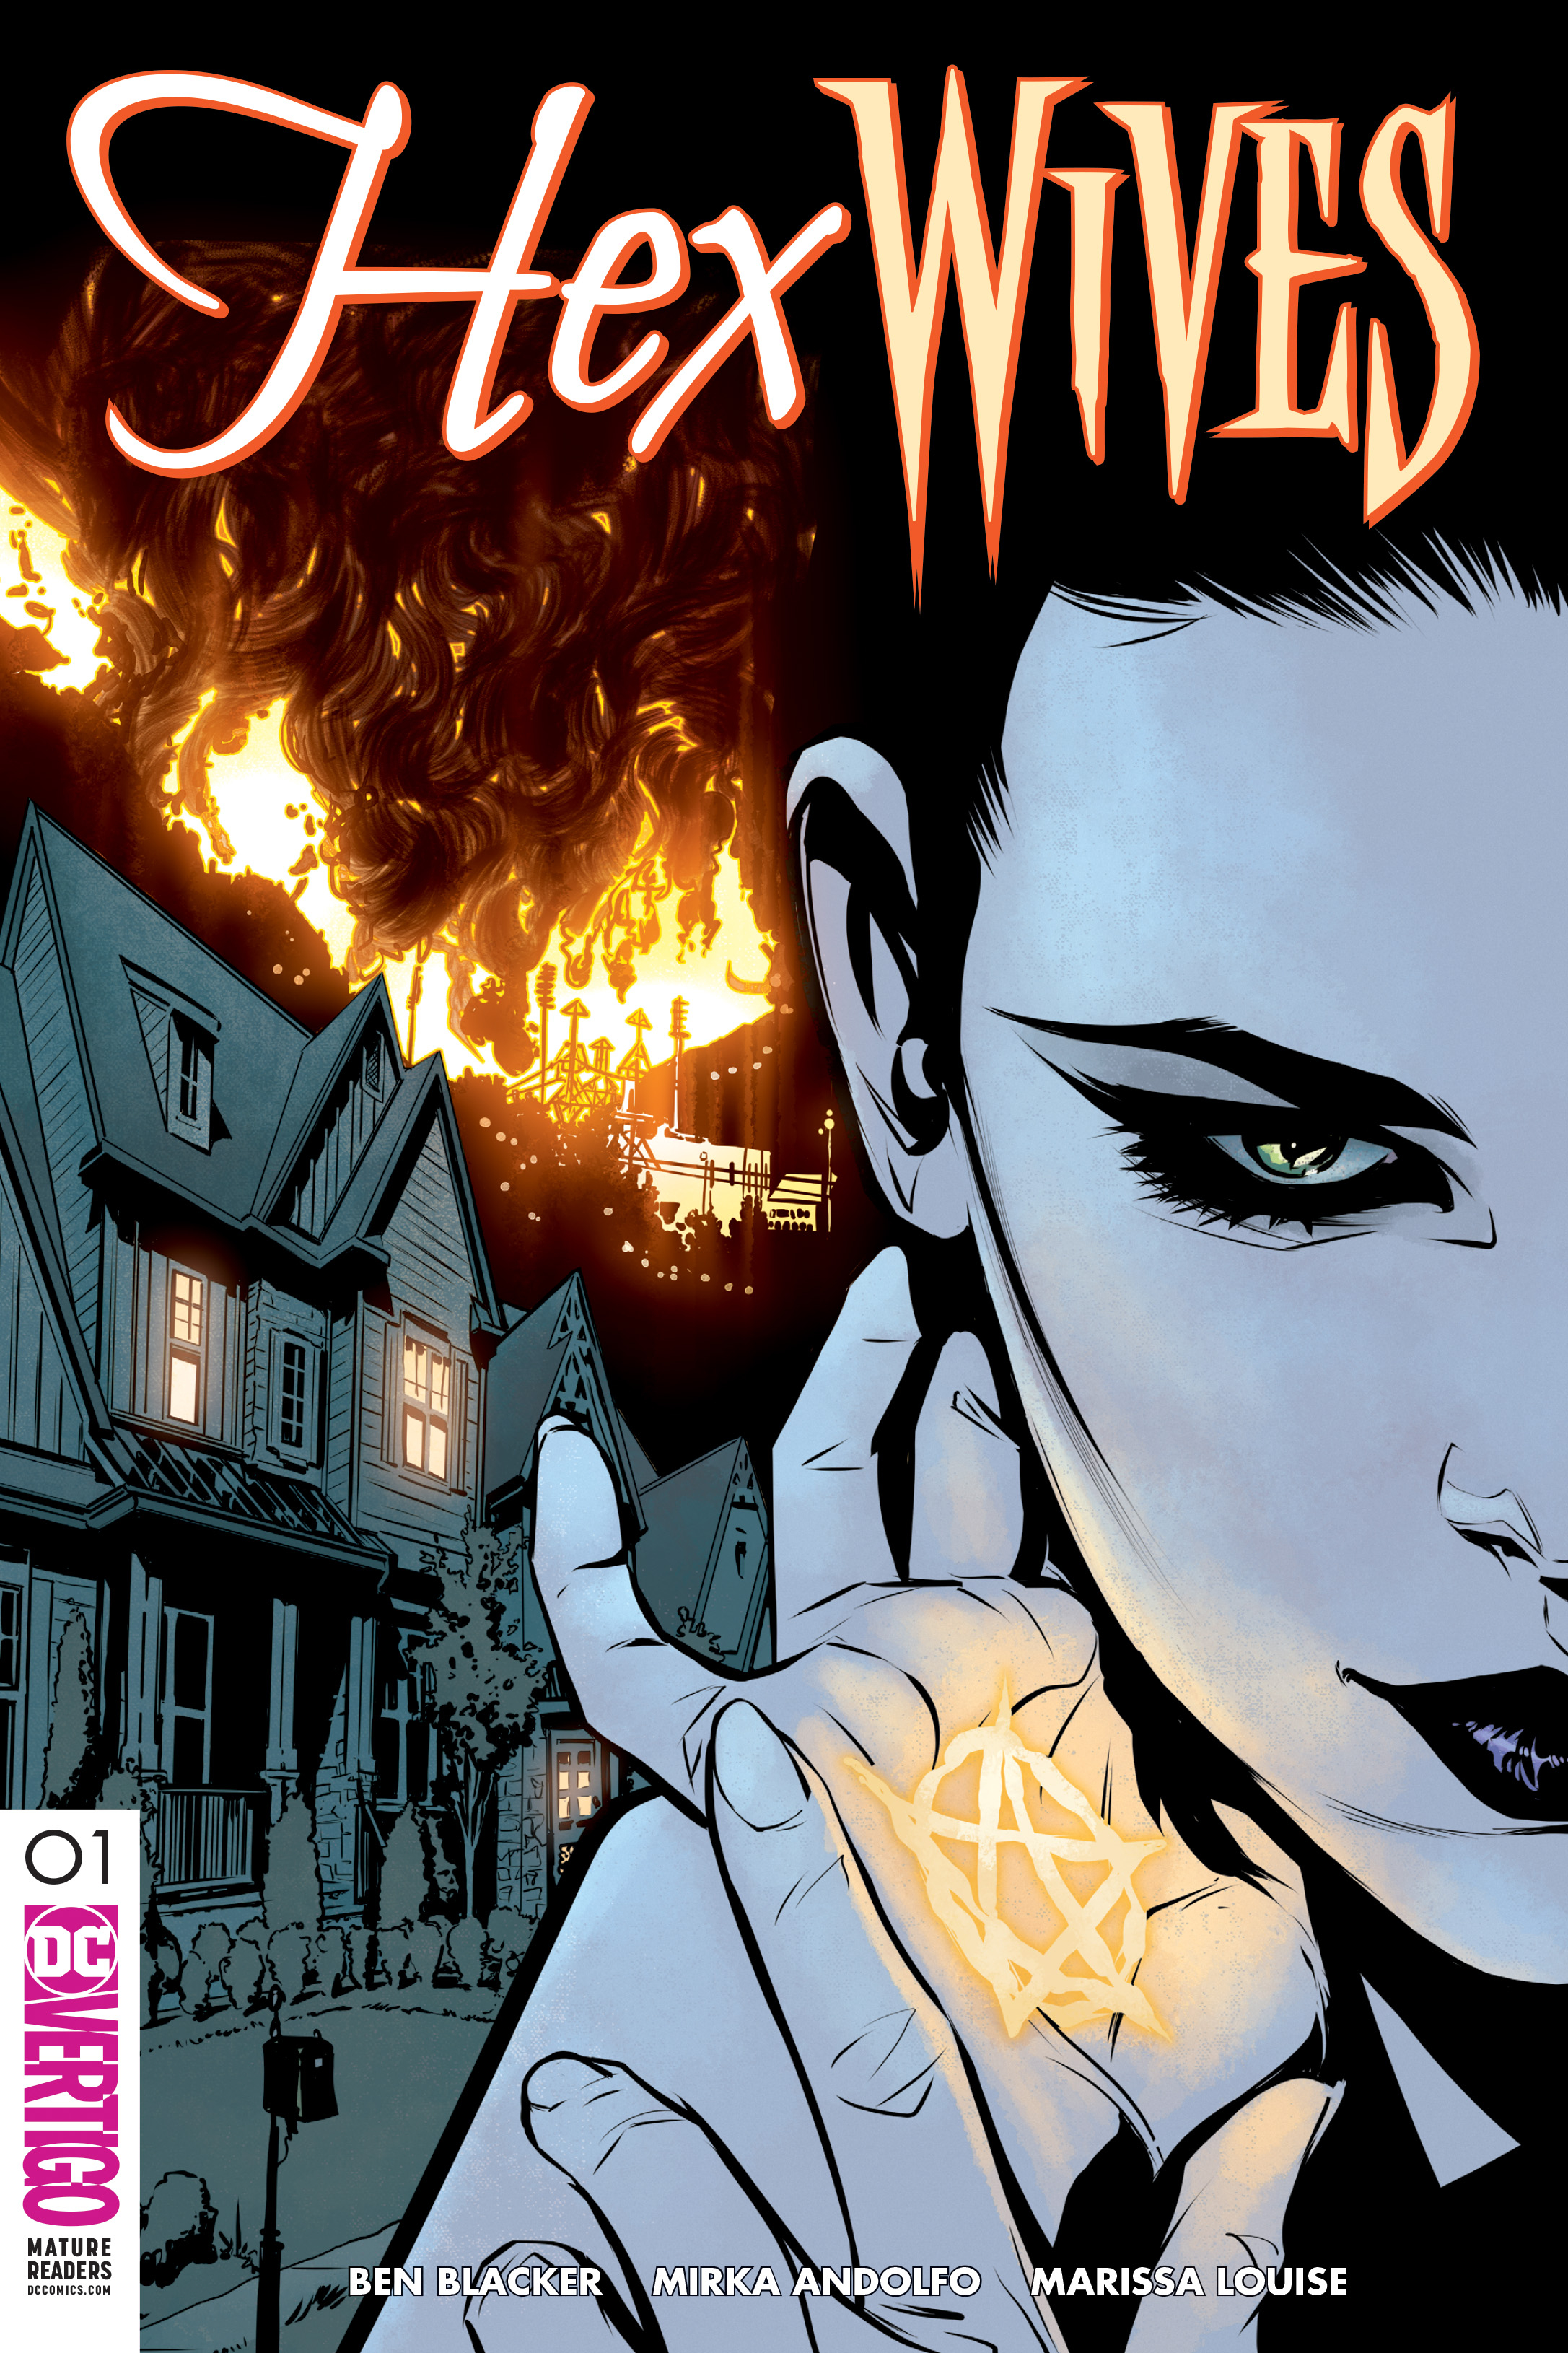 HEX WIVES #1 (MR)